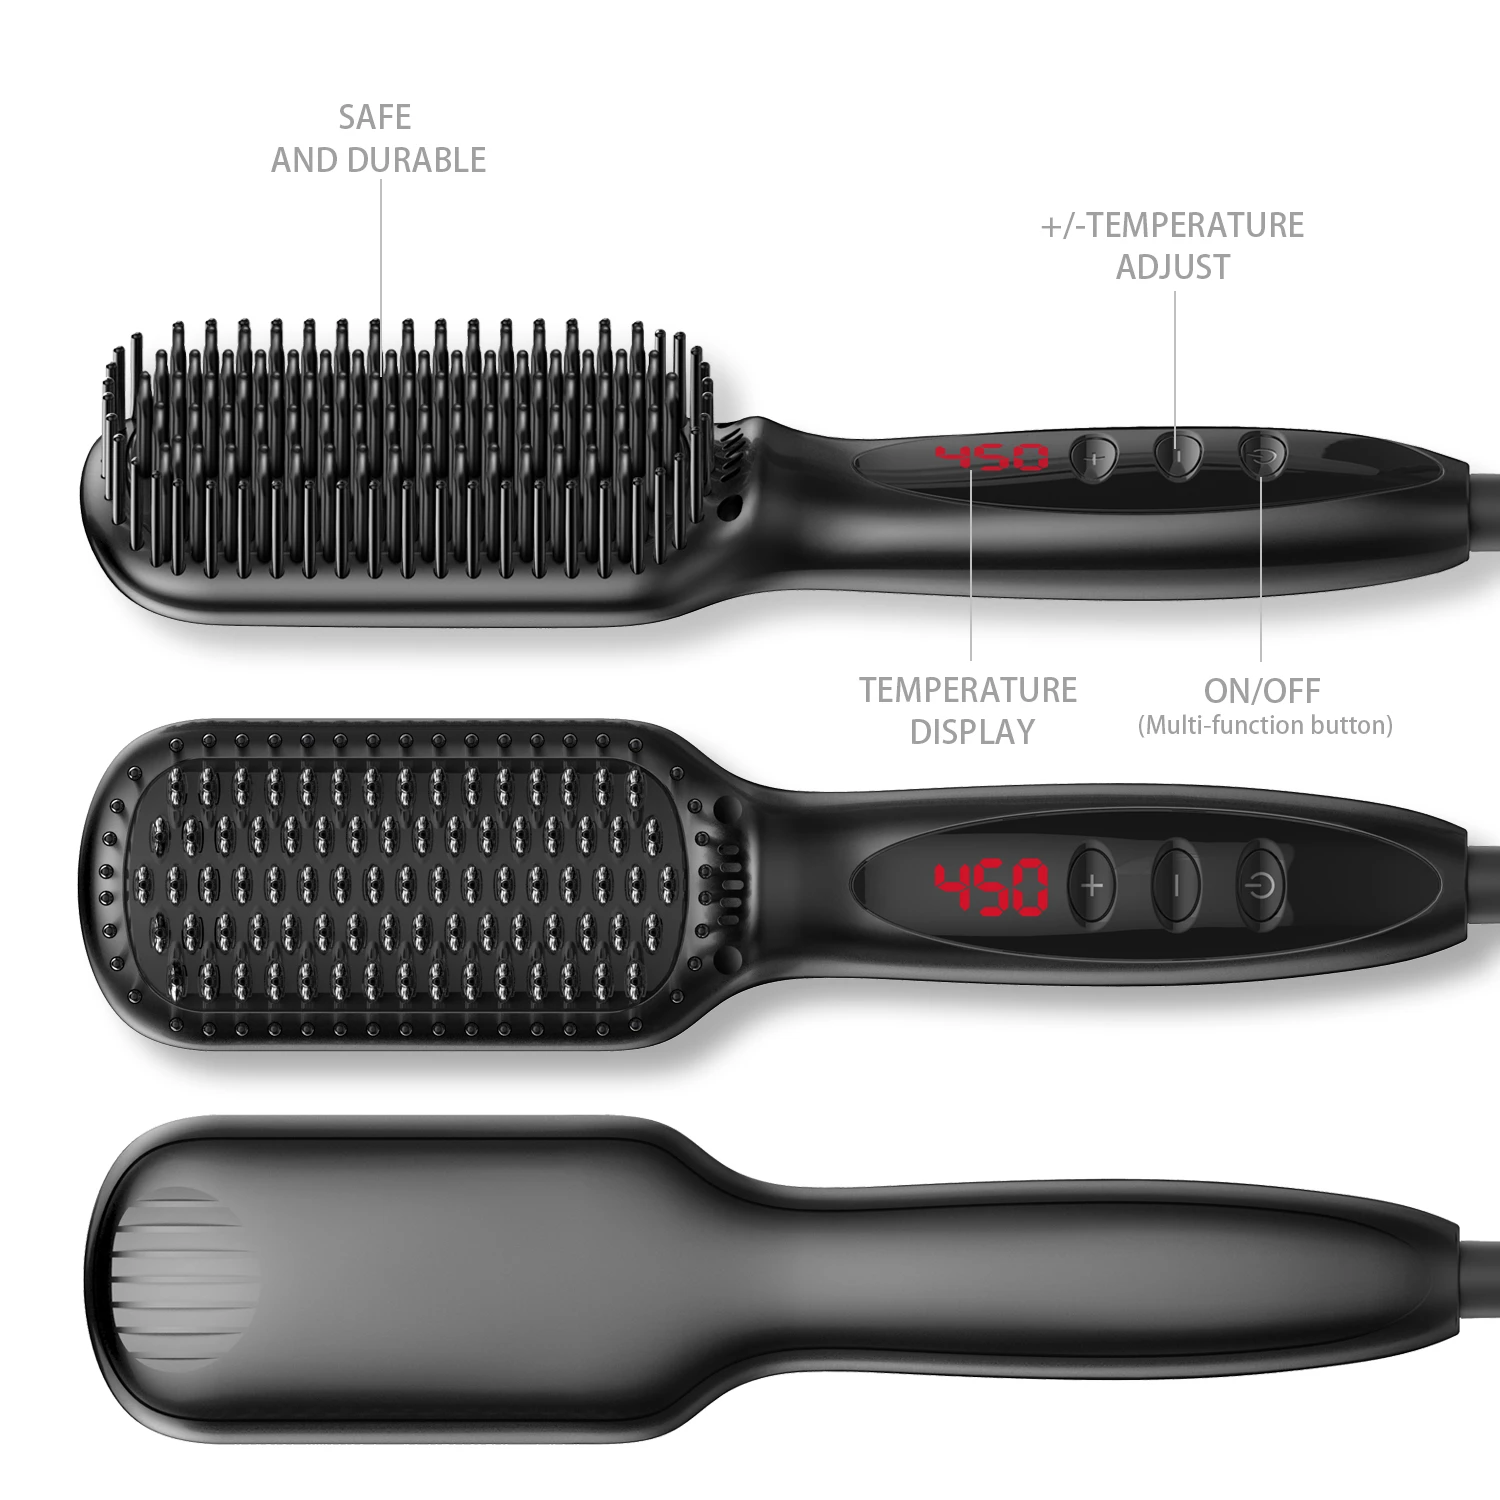 Wholesale Fast Hair Straightener Hot Comb Peigne Electrique Electric Beard Straightening Brush Home Profession Hair Styler Tool